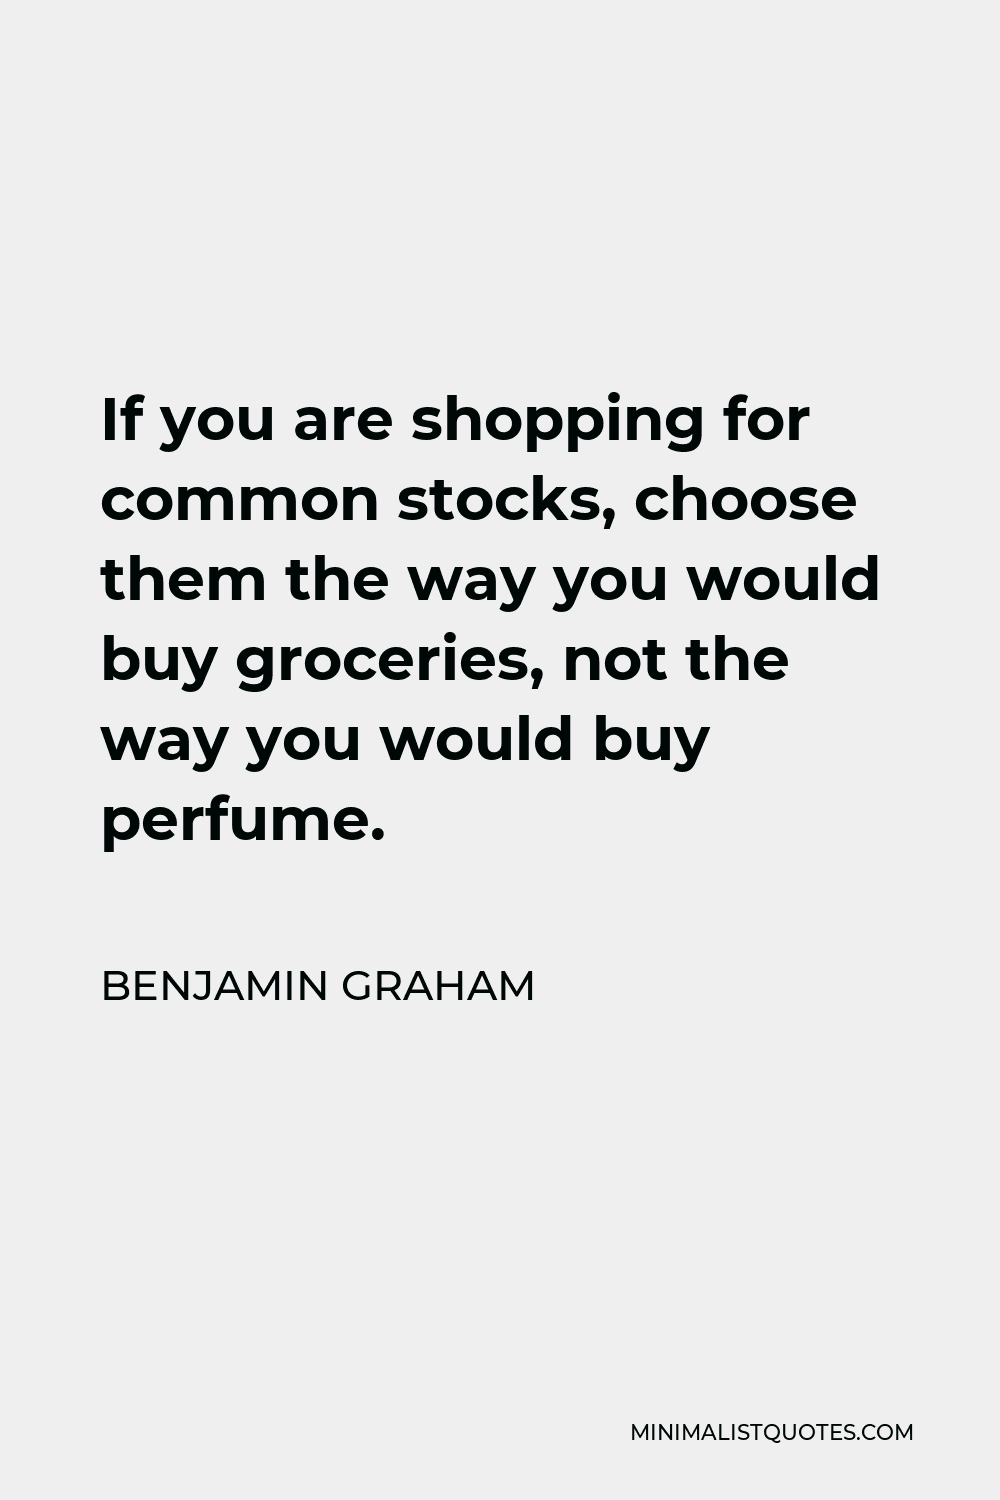 Benjamin Graham Quote - If you are shopping for common stocks, choose them the way you would buy groceries, not the way you would buy perfume.